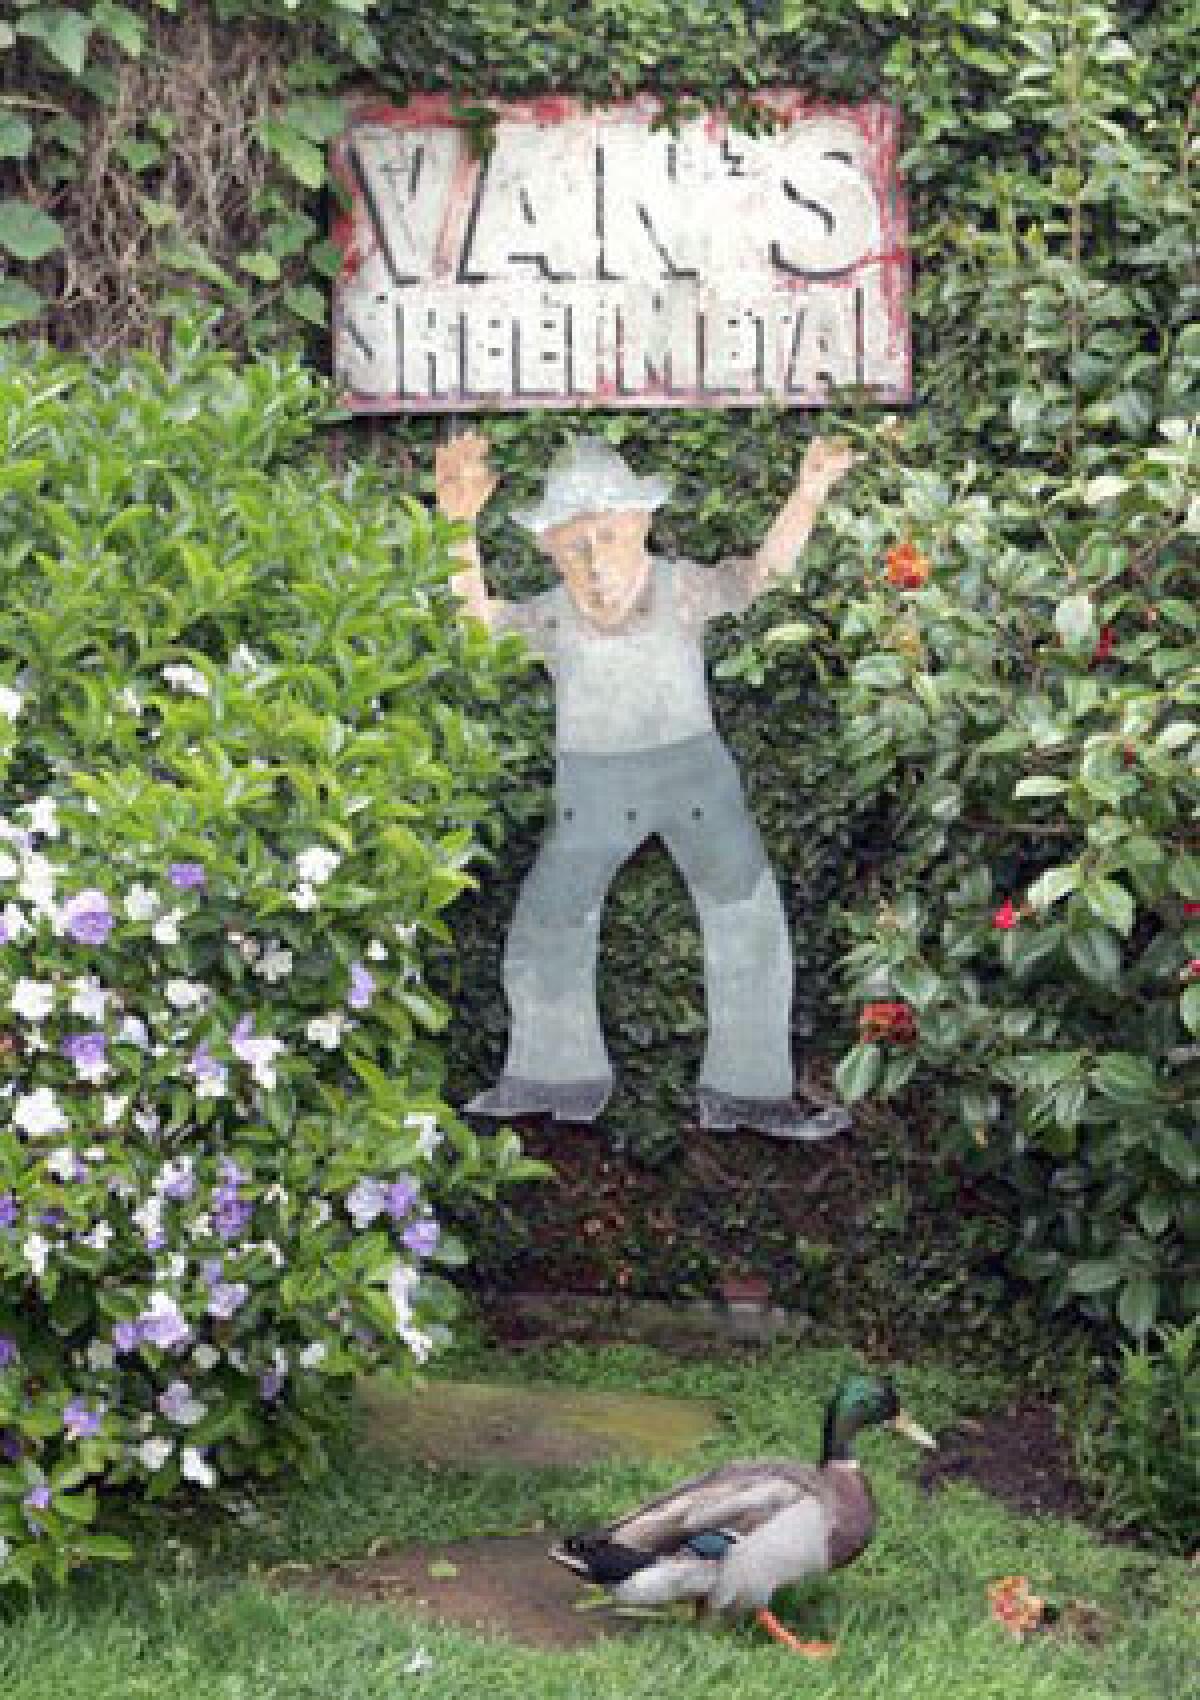 Alley Mills and Orson Bean fill their Venice backyard with retro signs from the past.